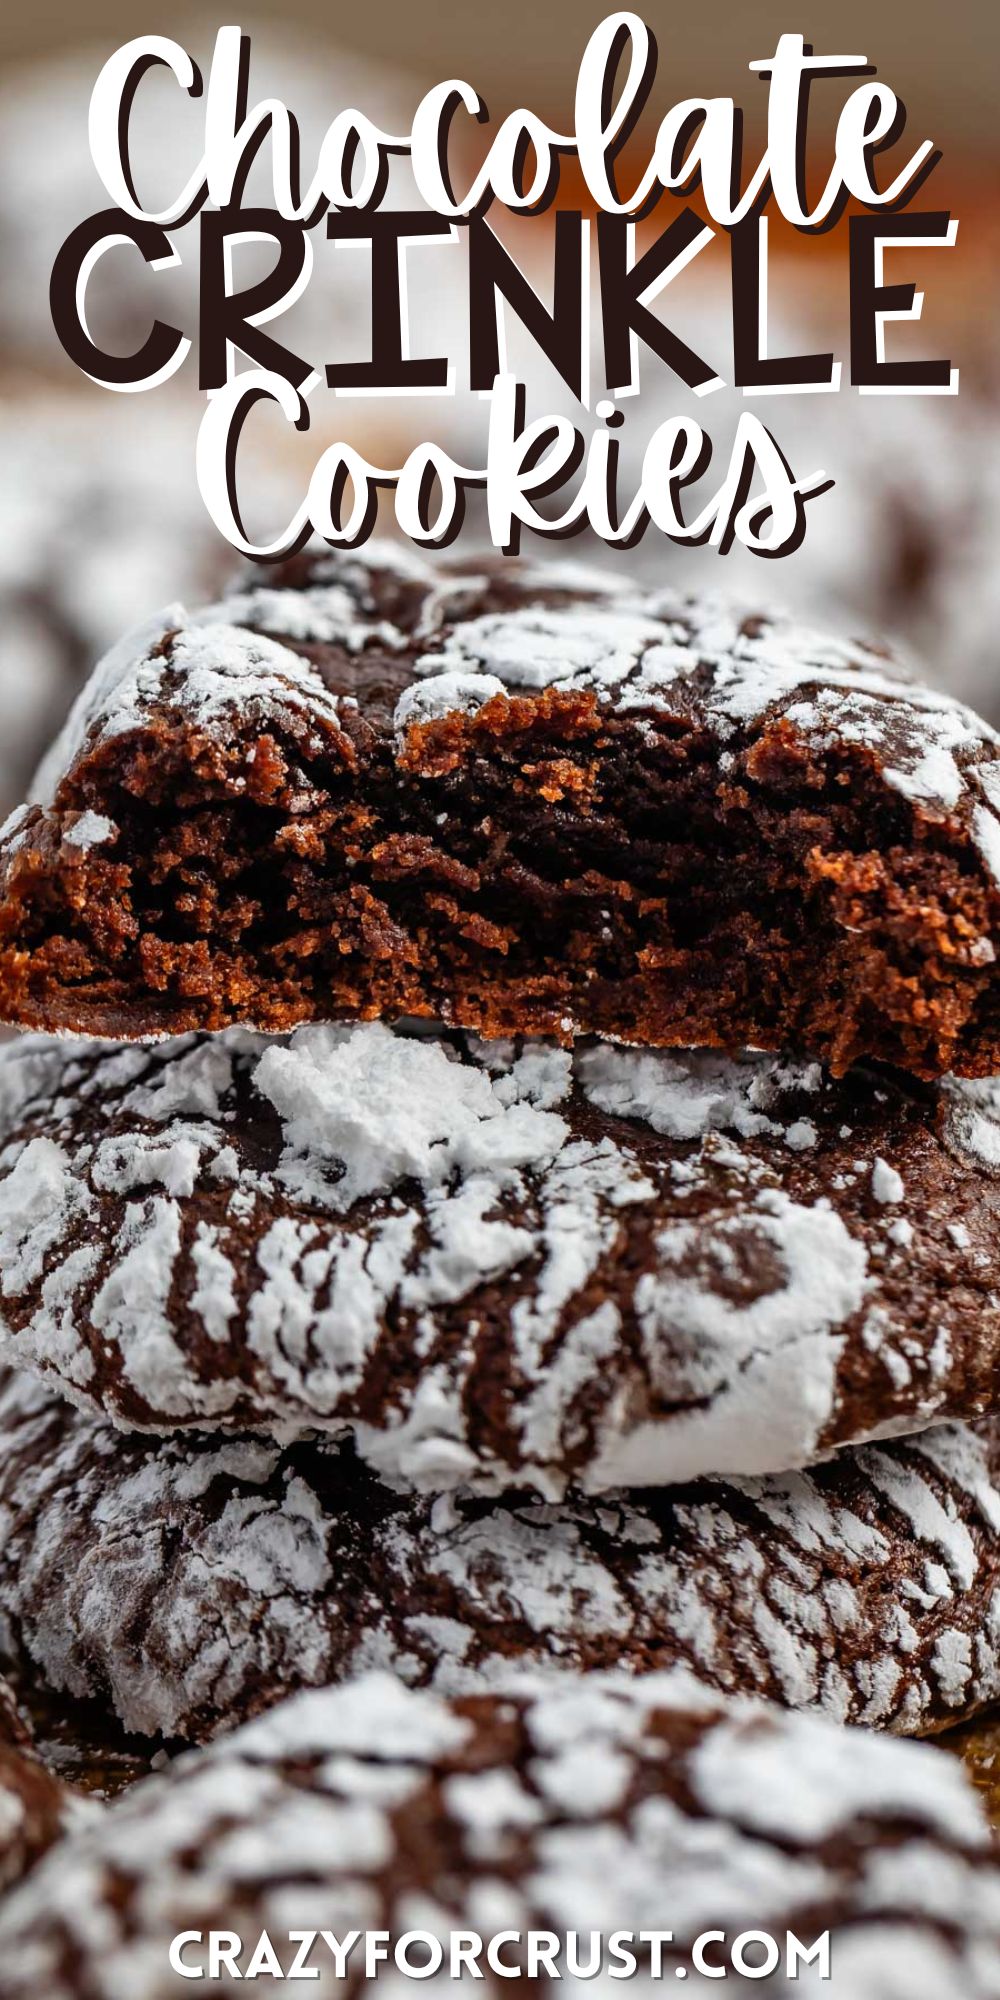 chocolate crinkle cookies covered in powdered sugar with words on the image.